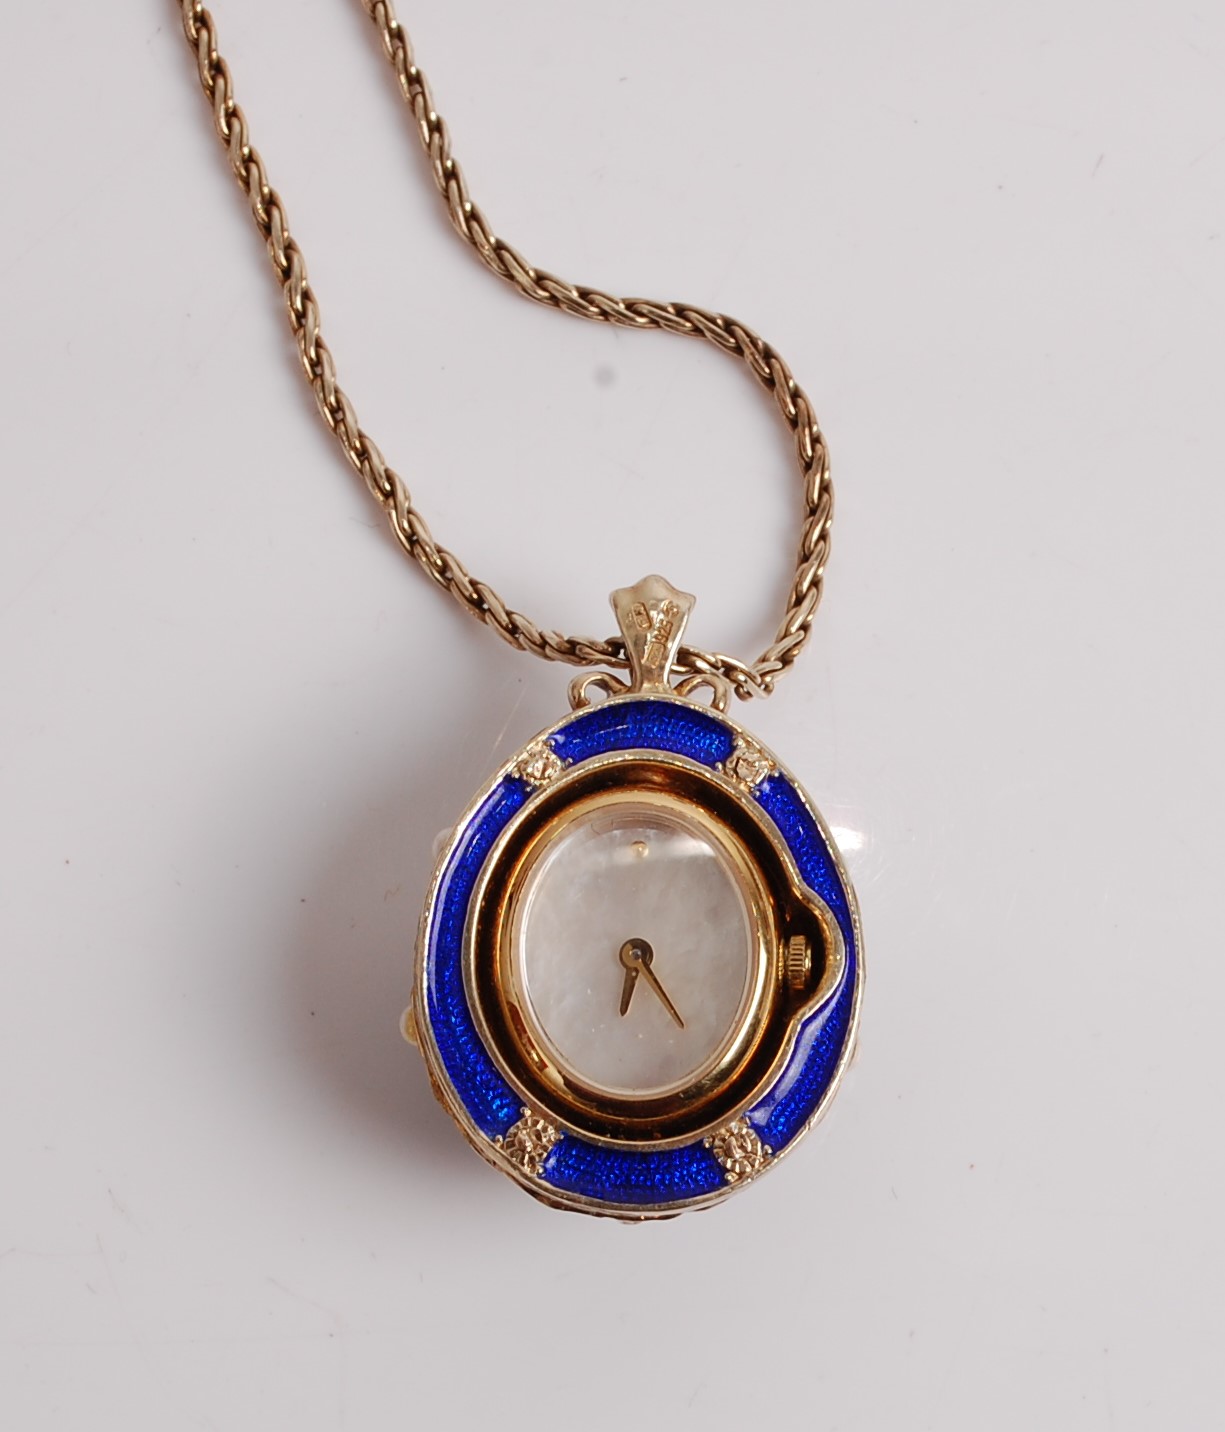 The House of Fabergé silver gilt and enamel Imperial pearl egg timepiece, on neck chain, with - Bild 2 aus 2